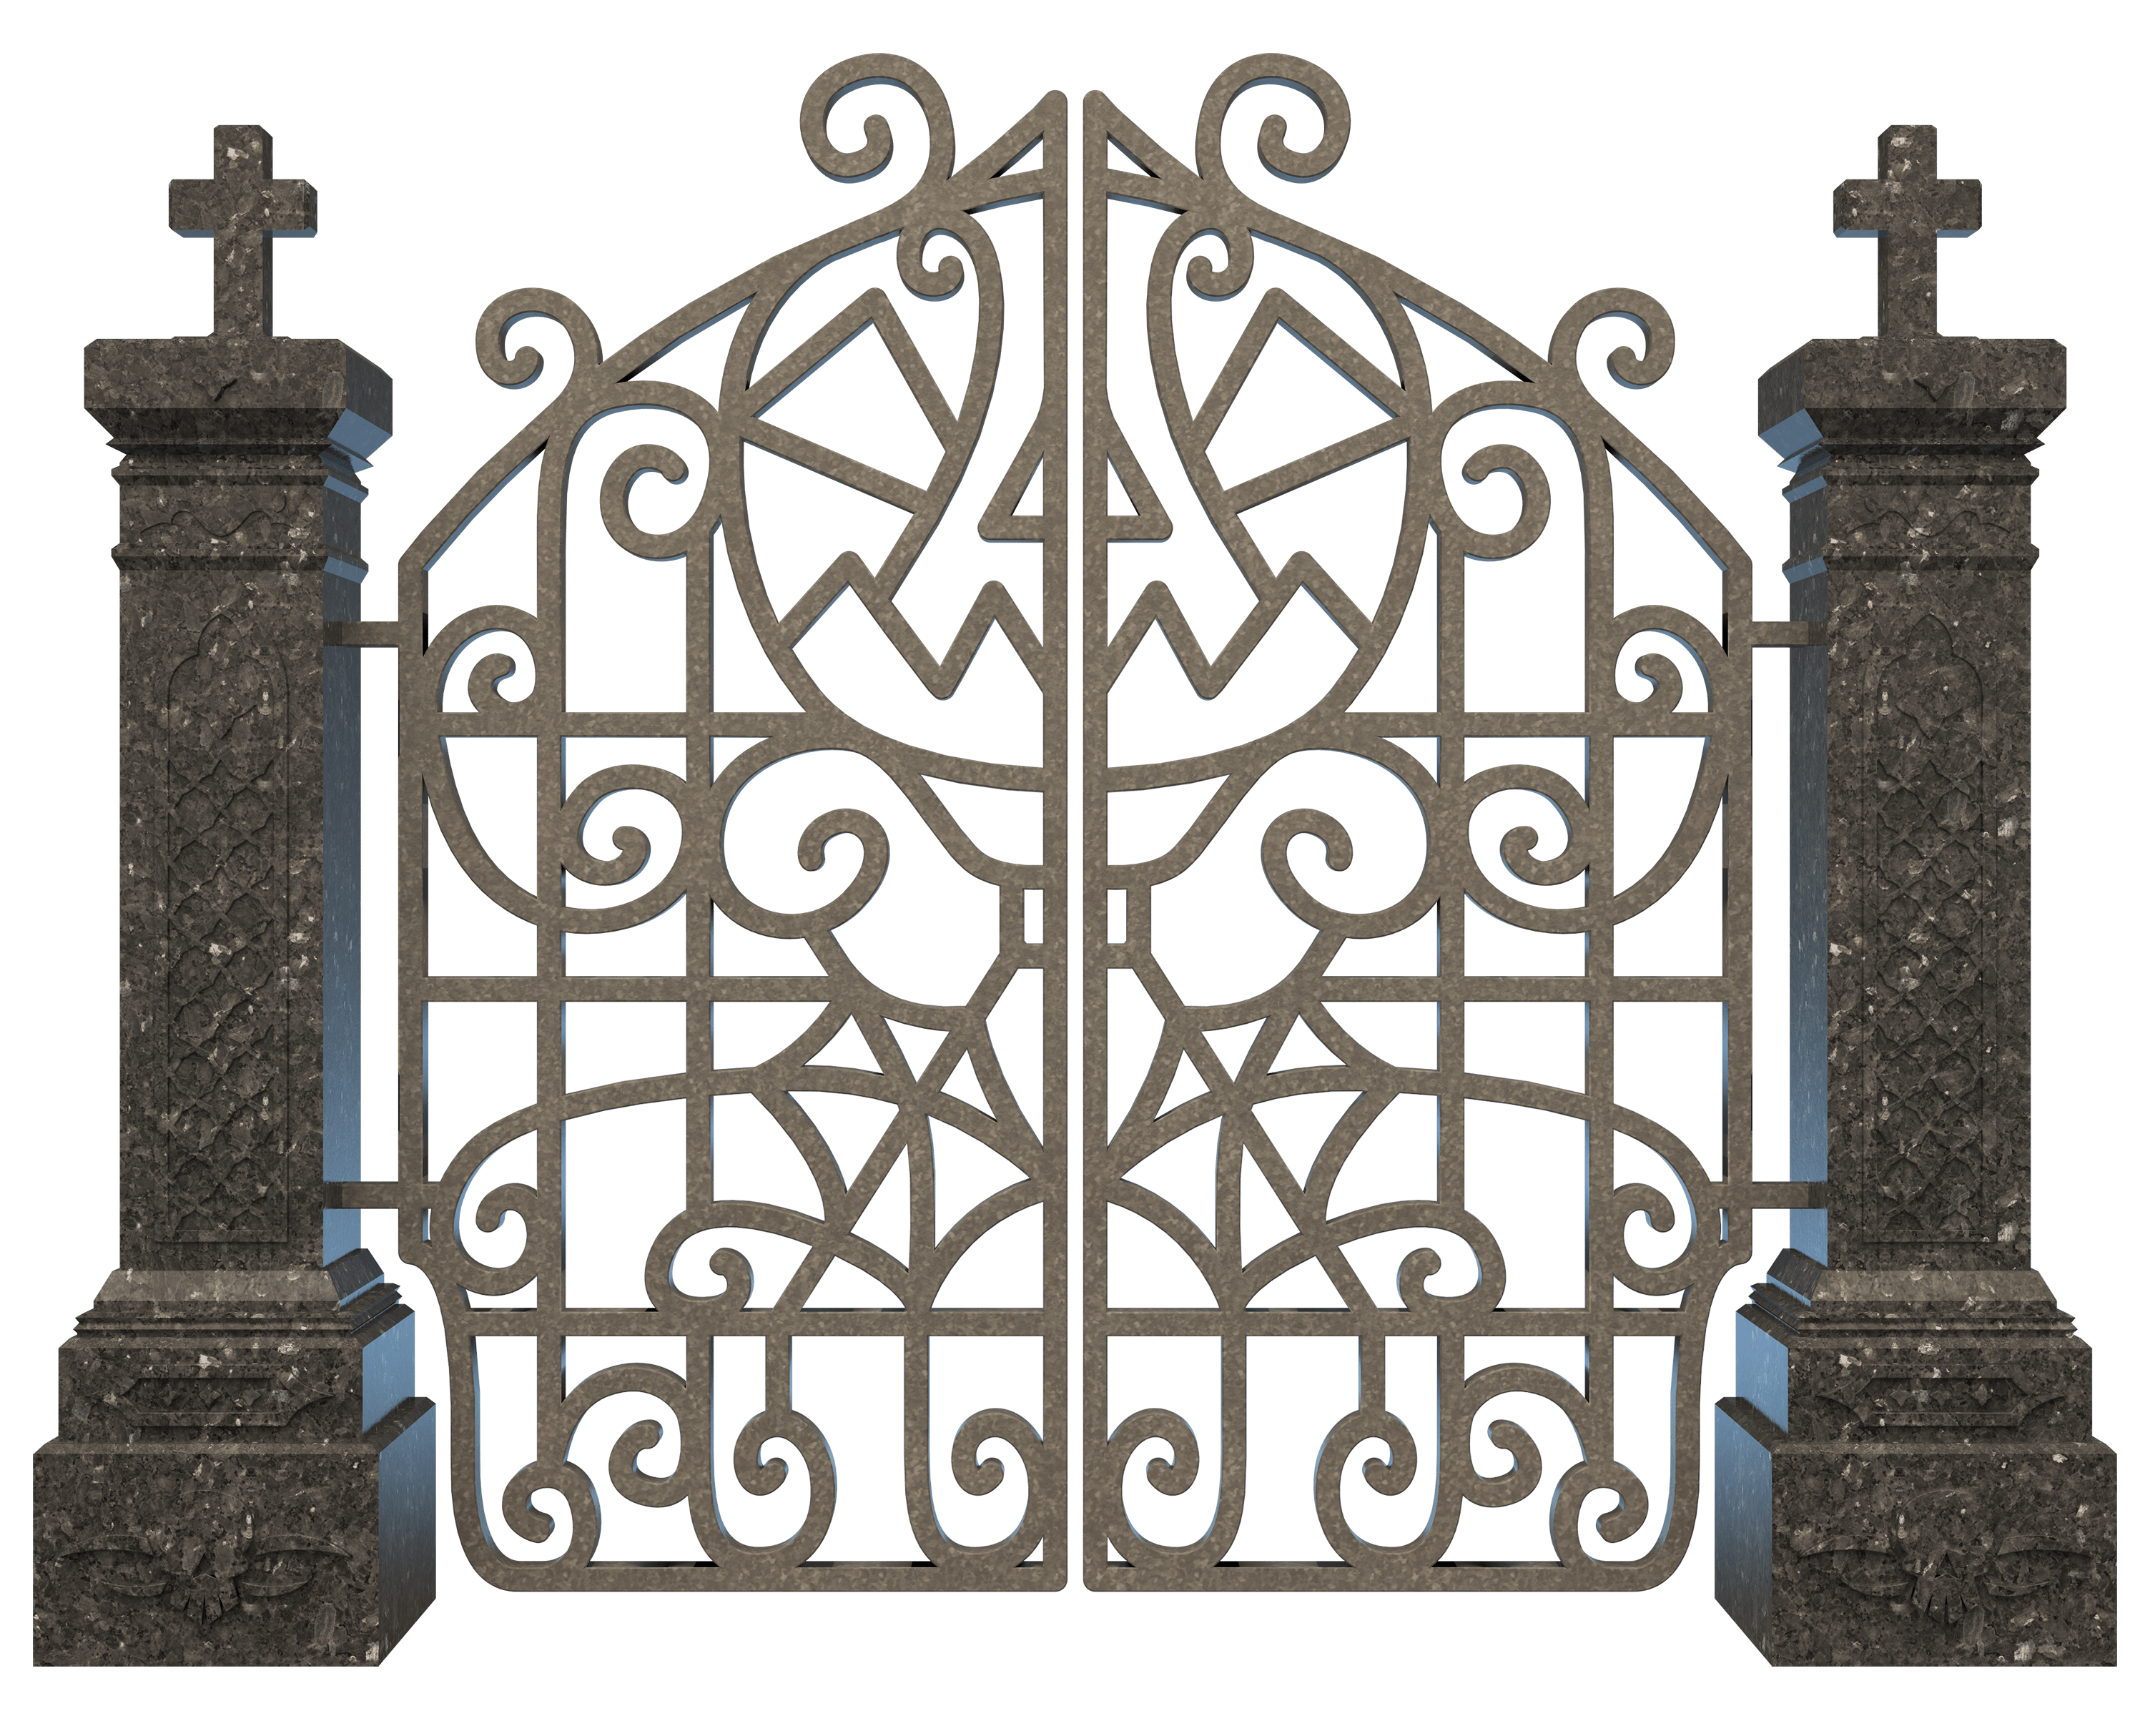 Grave 10 PNG Stock by Roy3D P